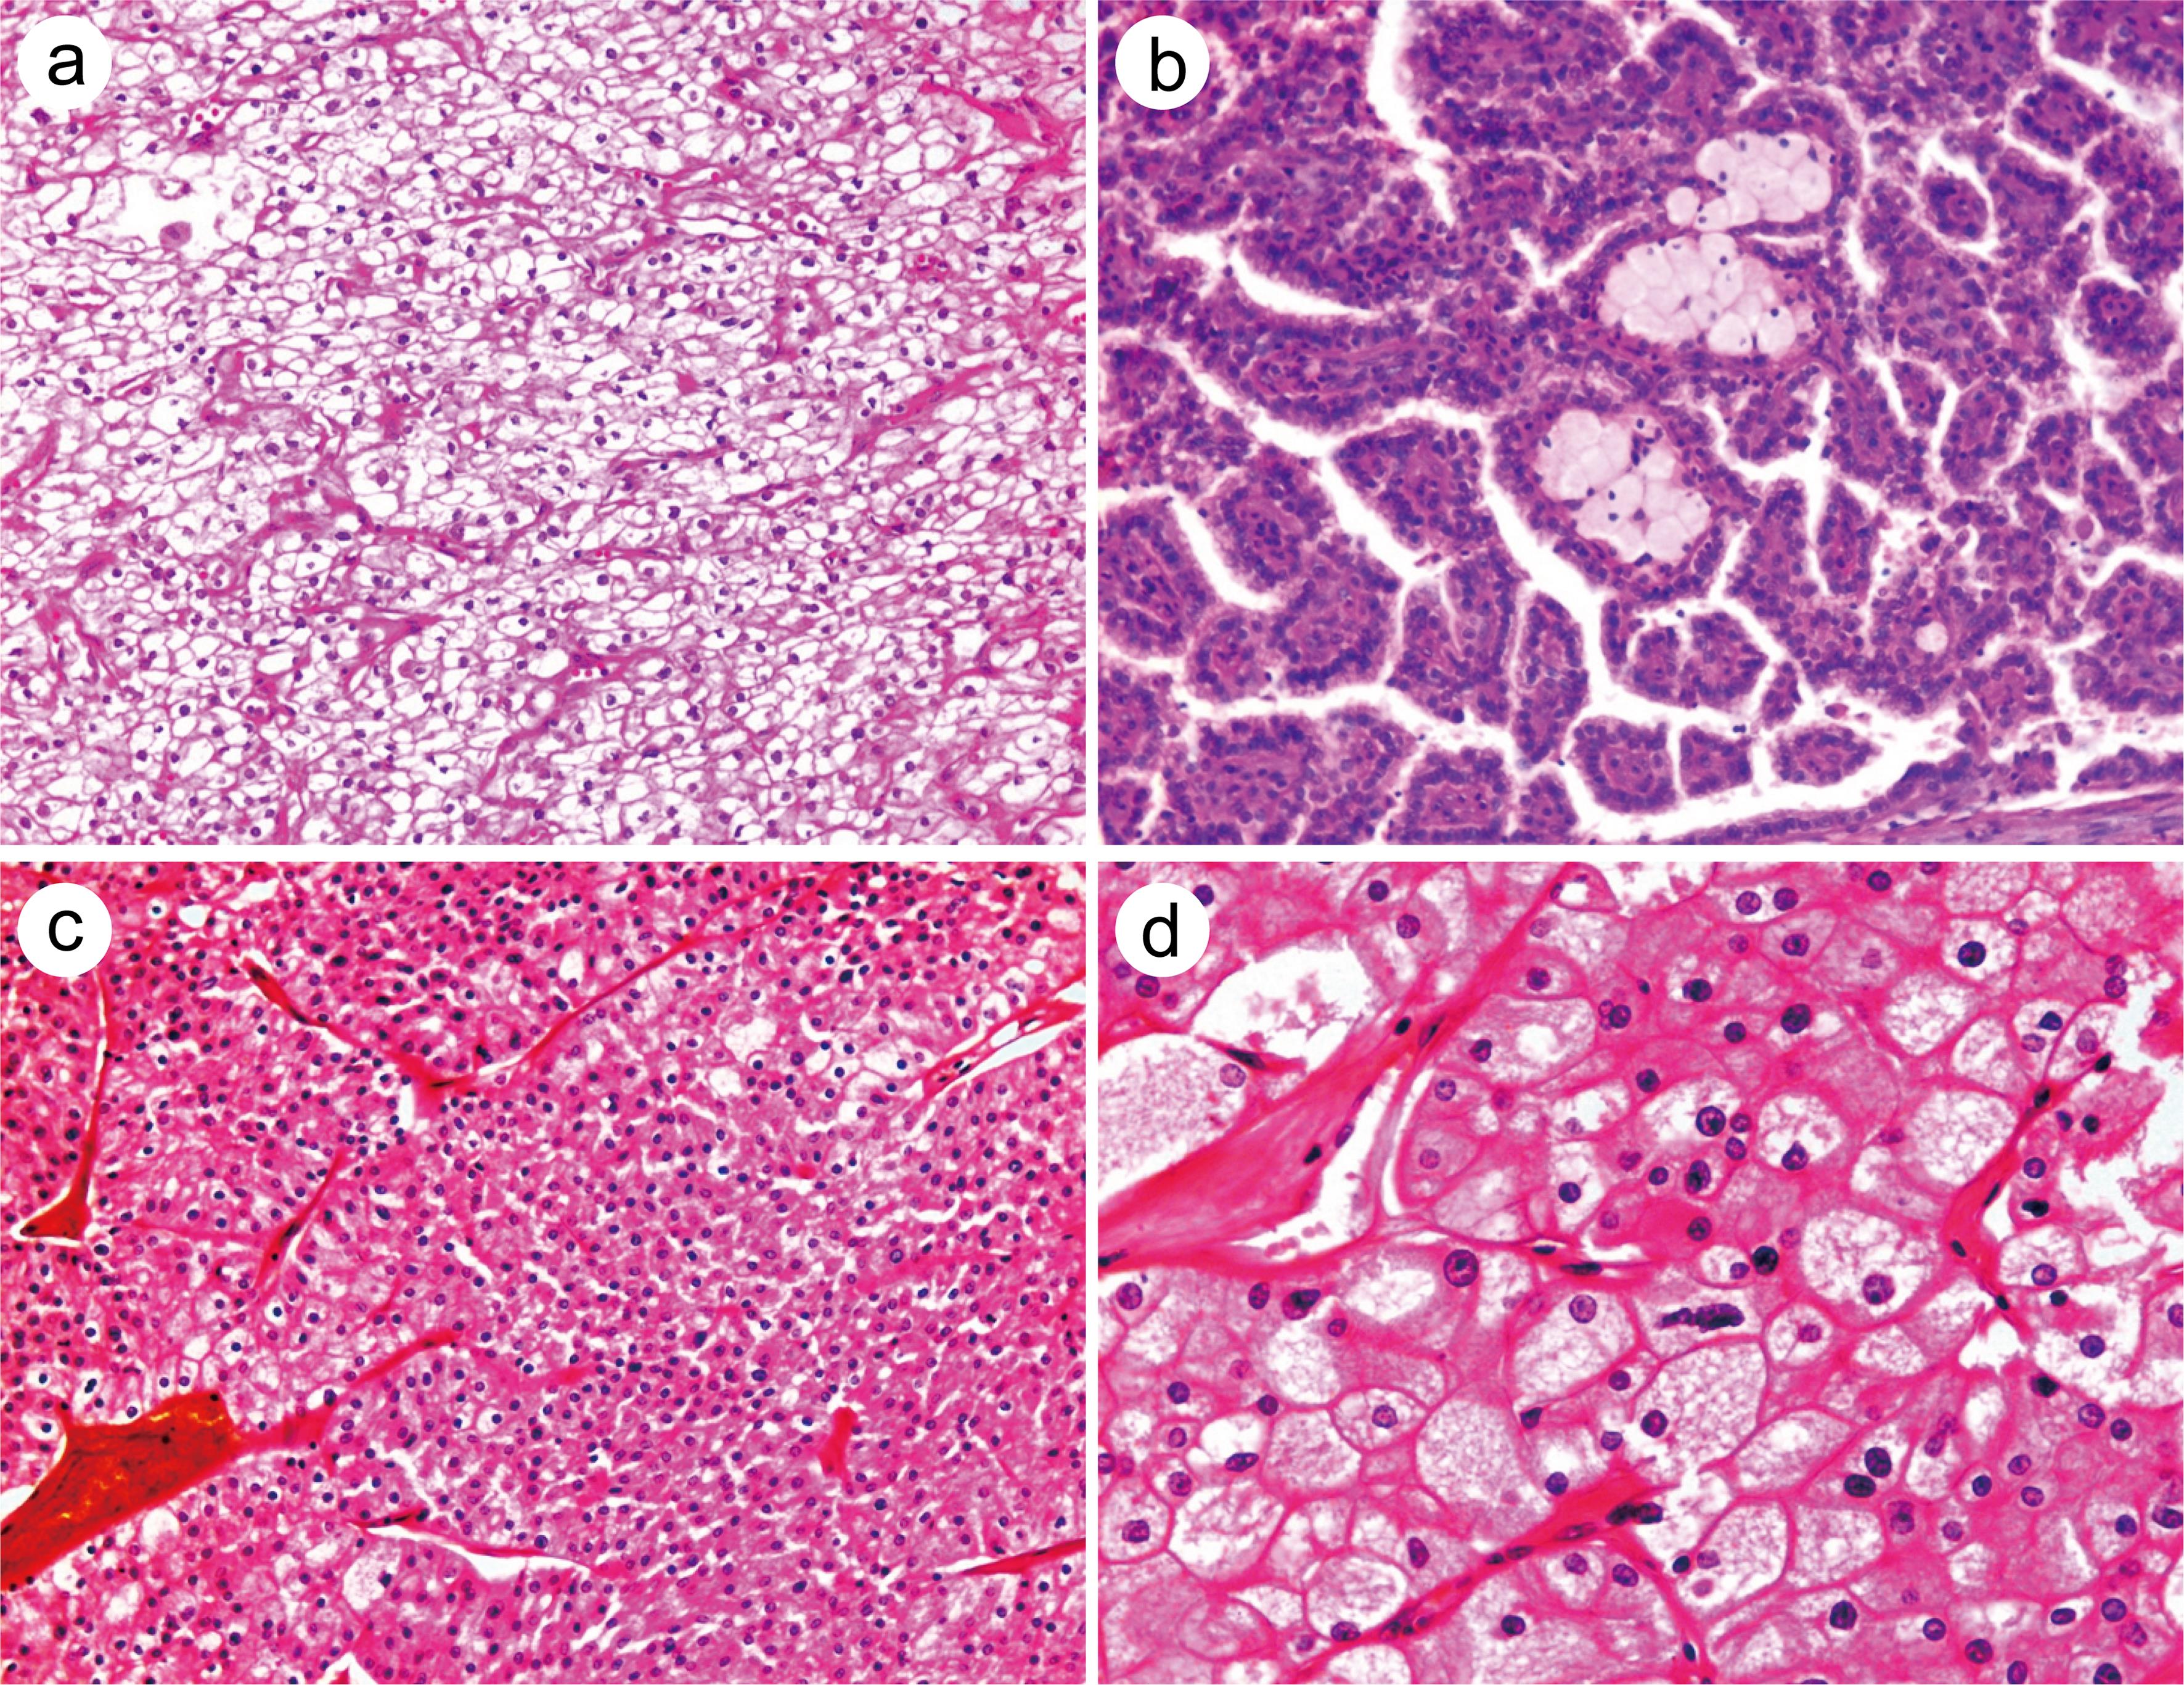 The microscopic features of the main morphological types of renal cell tumors.